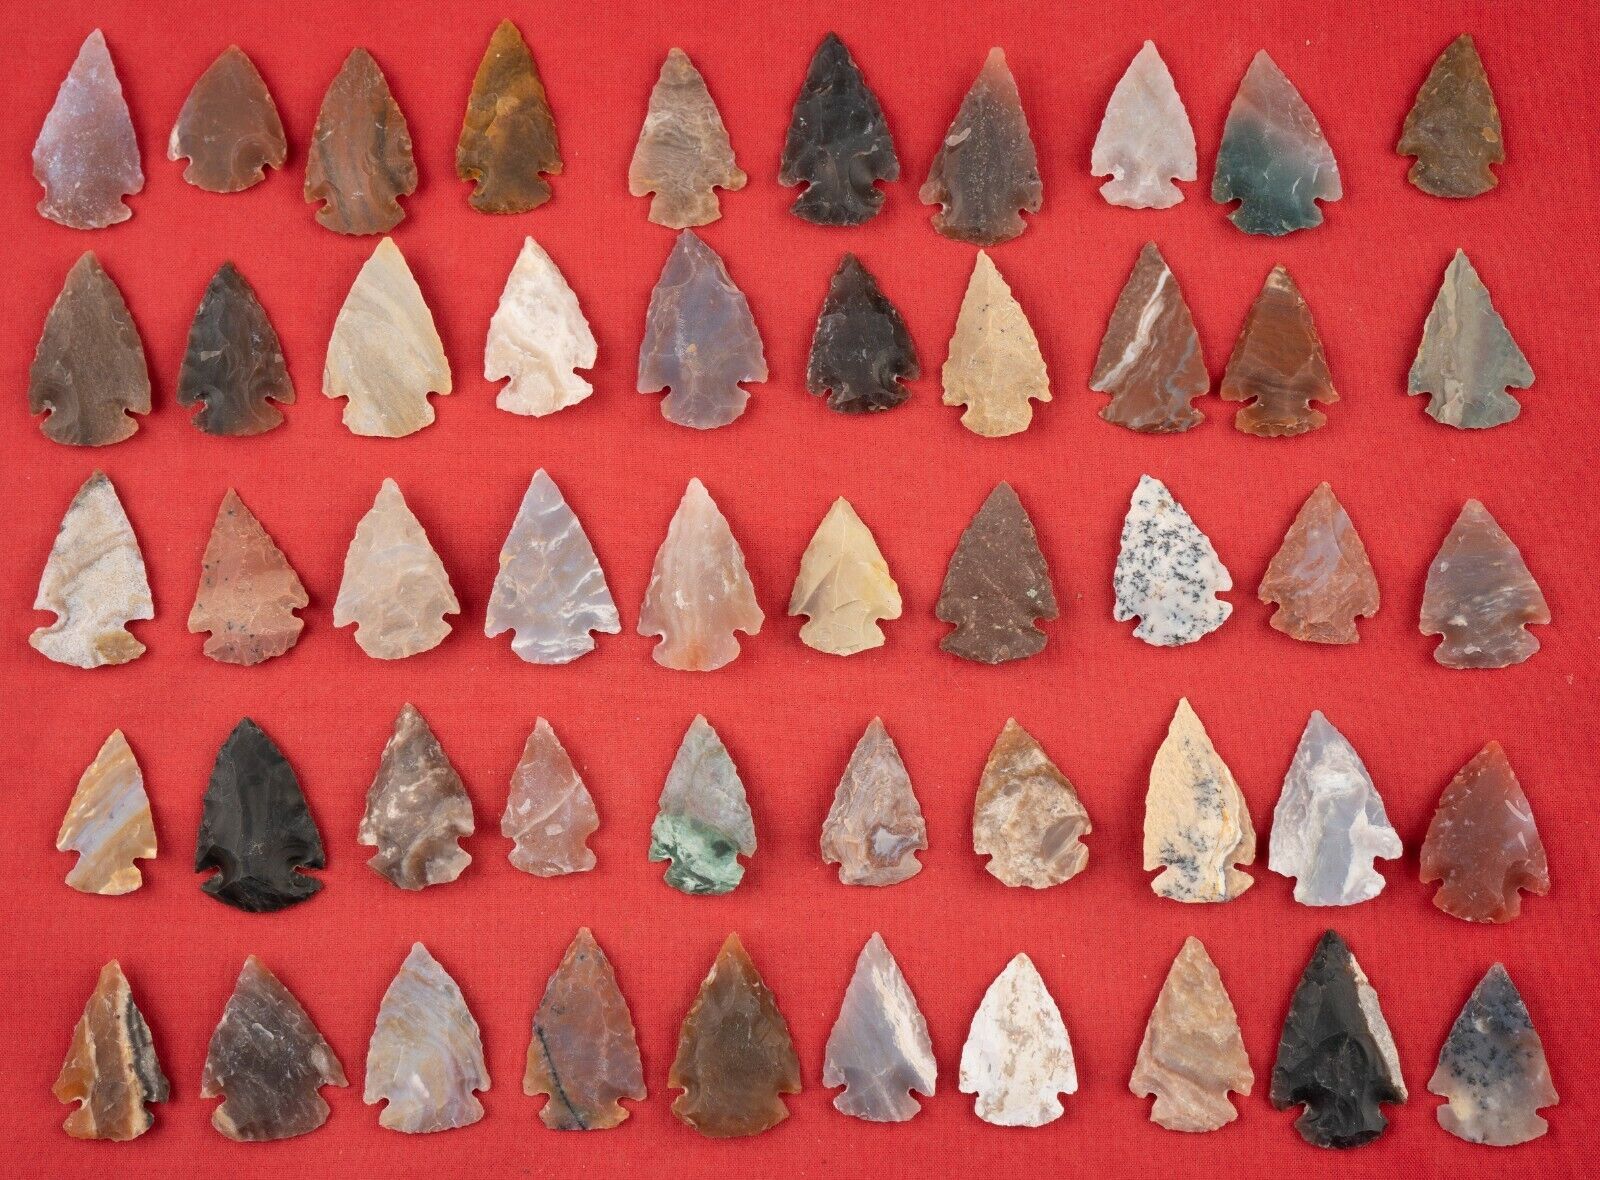 *** 50 PC Lot Flint Arrowhead OH Collection Project Spear Points Knife Blade ***